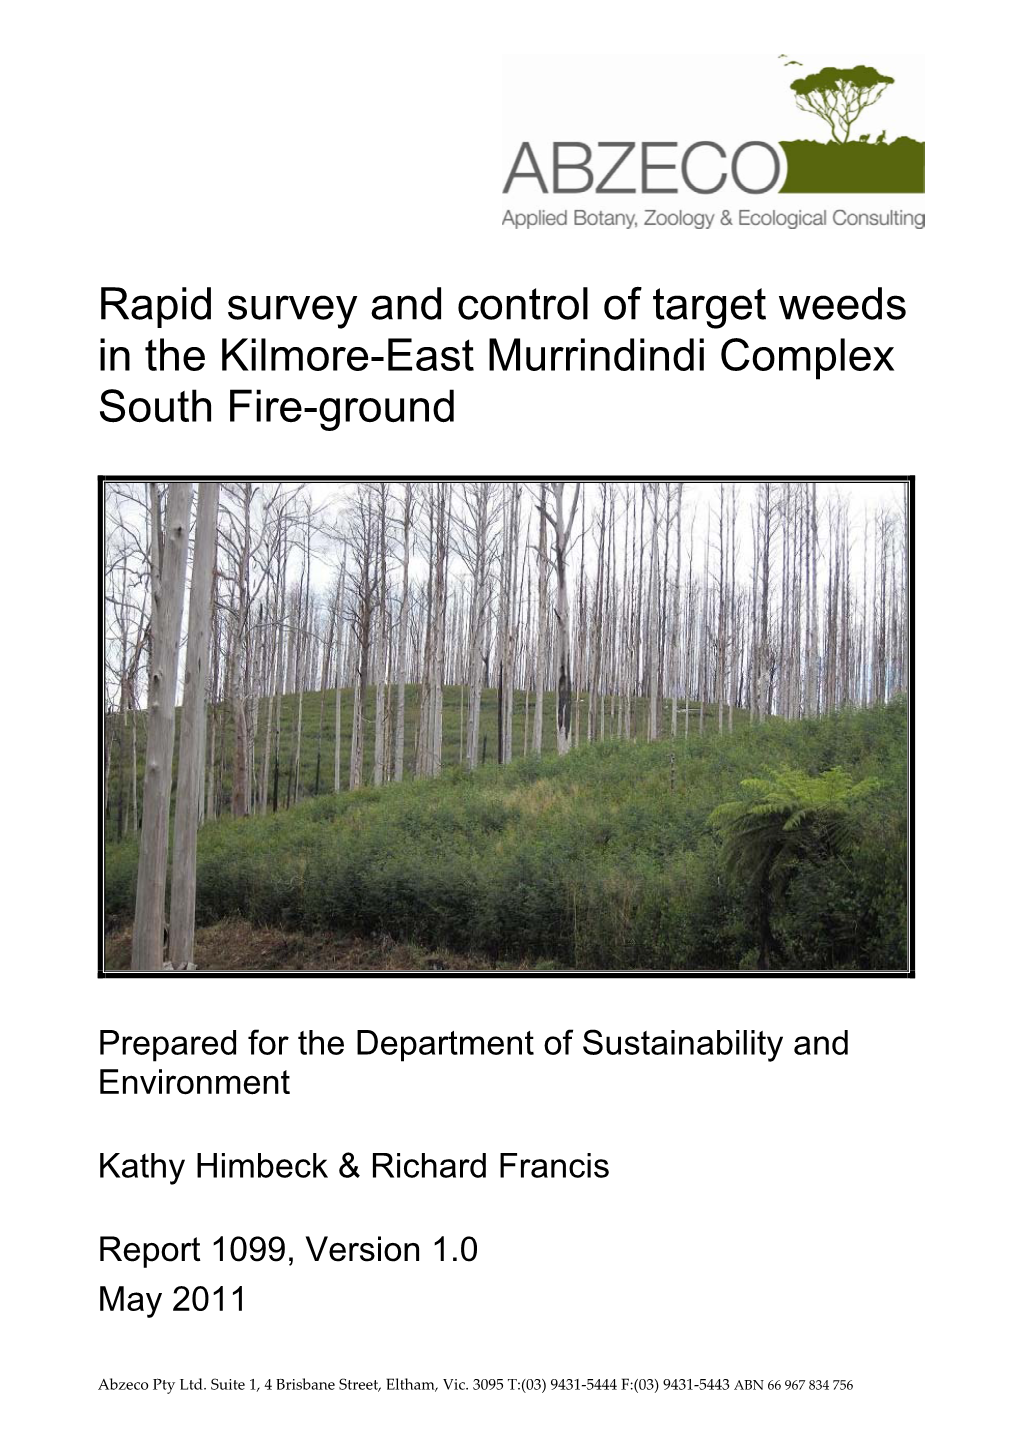 Rapid Survey and Control of Target Weeds in the Kilmore-East Murrindindi Complex South Fire-Ground